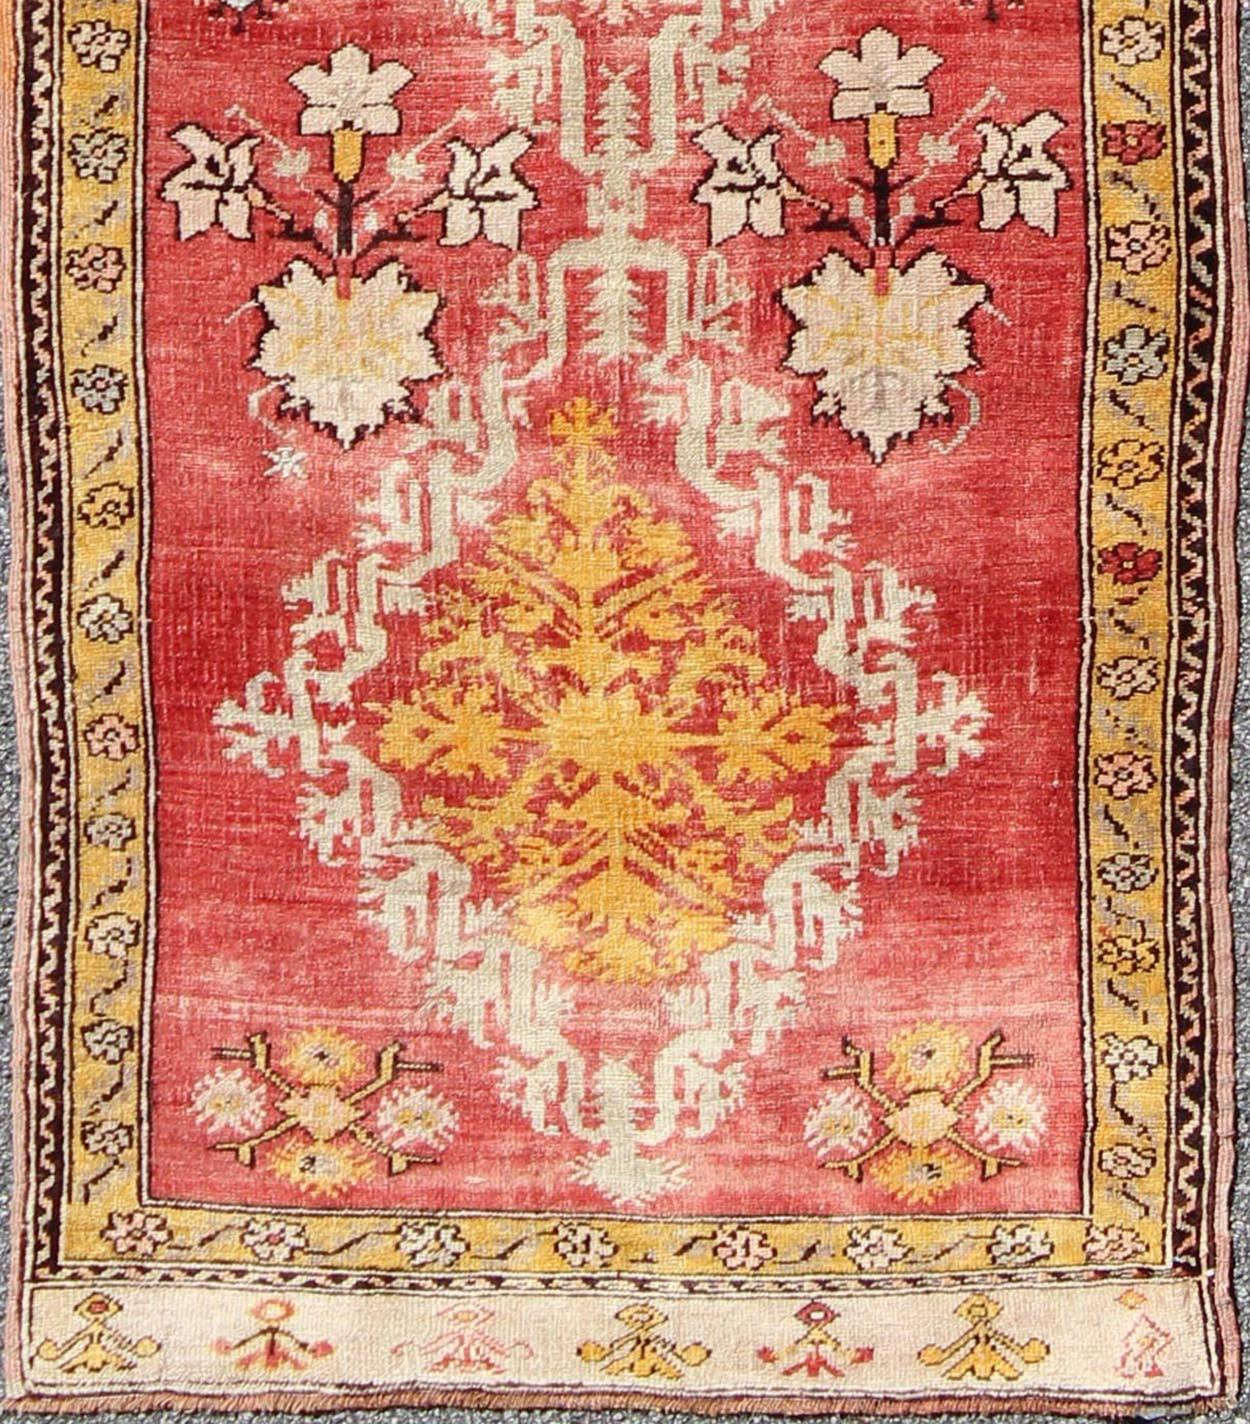 Measures: 3' x 10'3

Country of Origin: Turkey; Type: Oushak; Design: All-Over, Medallion, Sub-Tribal, Arabesque-Medallion; Keivan Woven Arts; rug NA-74546; Antique Turkish Oushak Runner with Tribal Medallions in Red, Orange, and Yellow; Antique